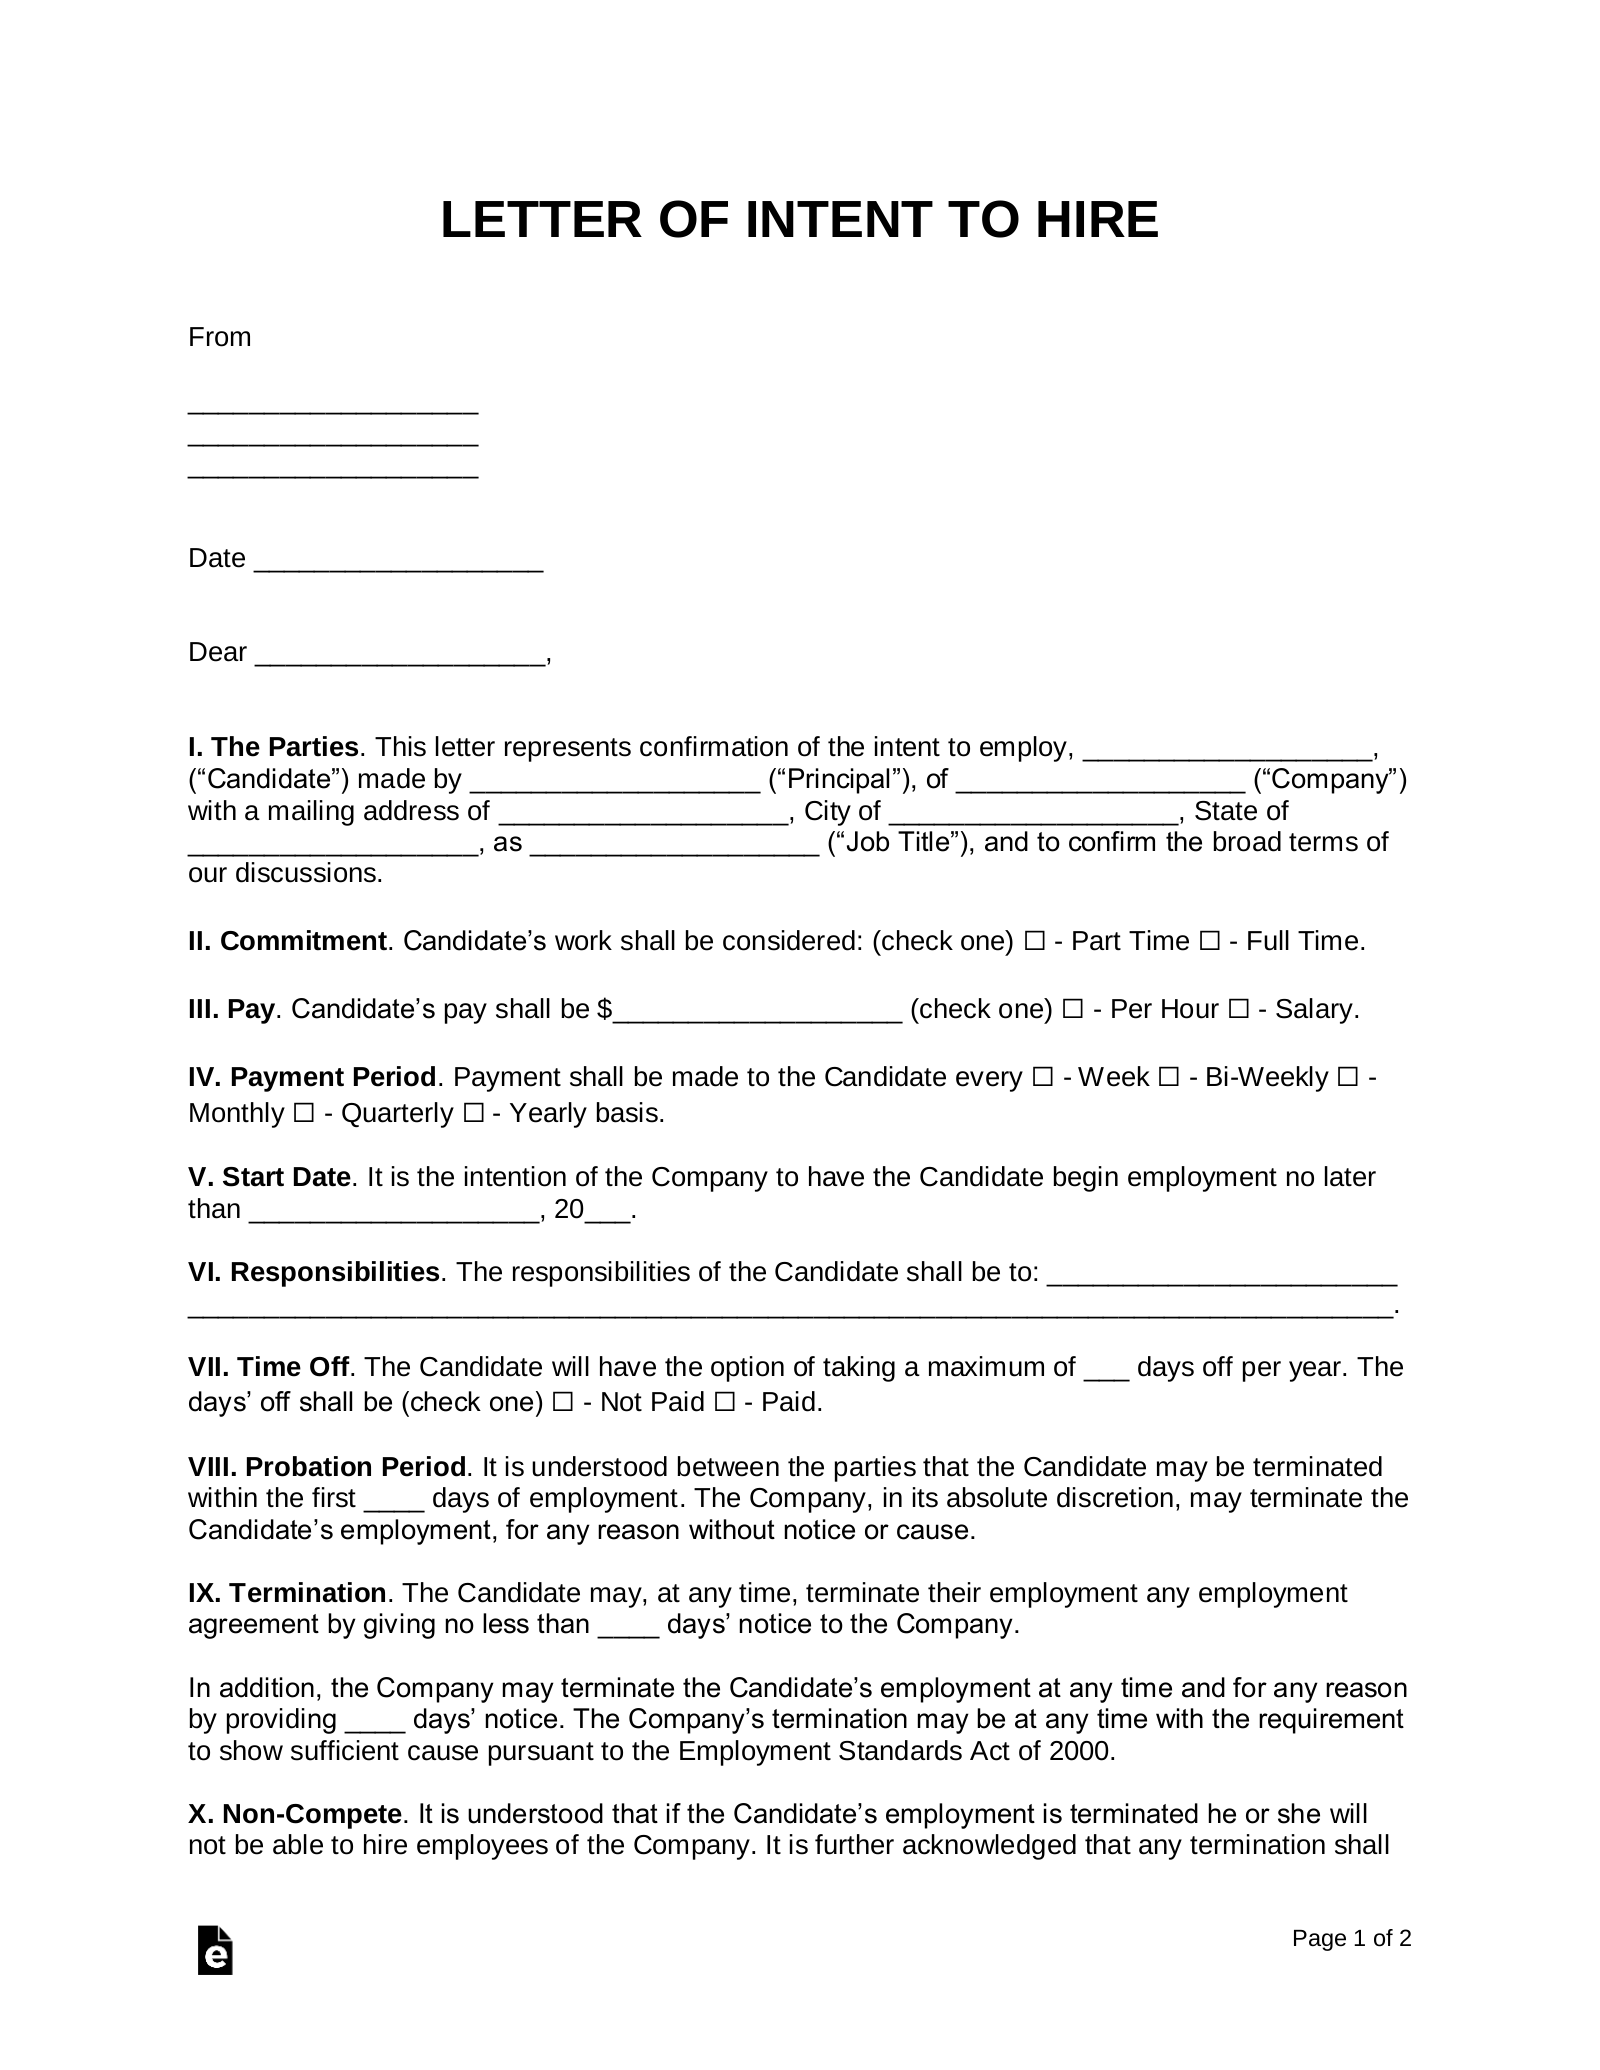 Employment Letter Of Intent To Hire from eforms.com